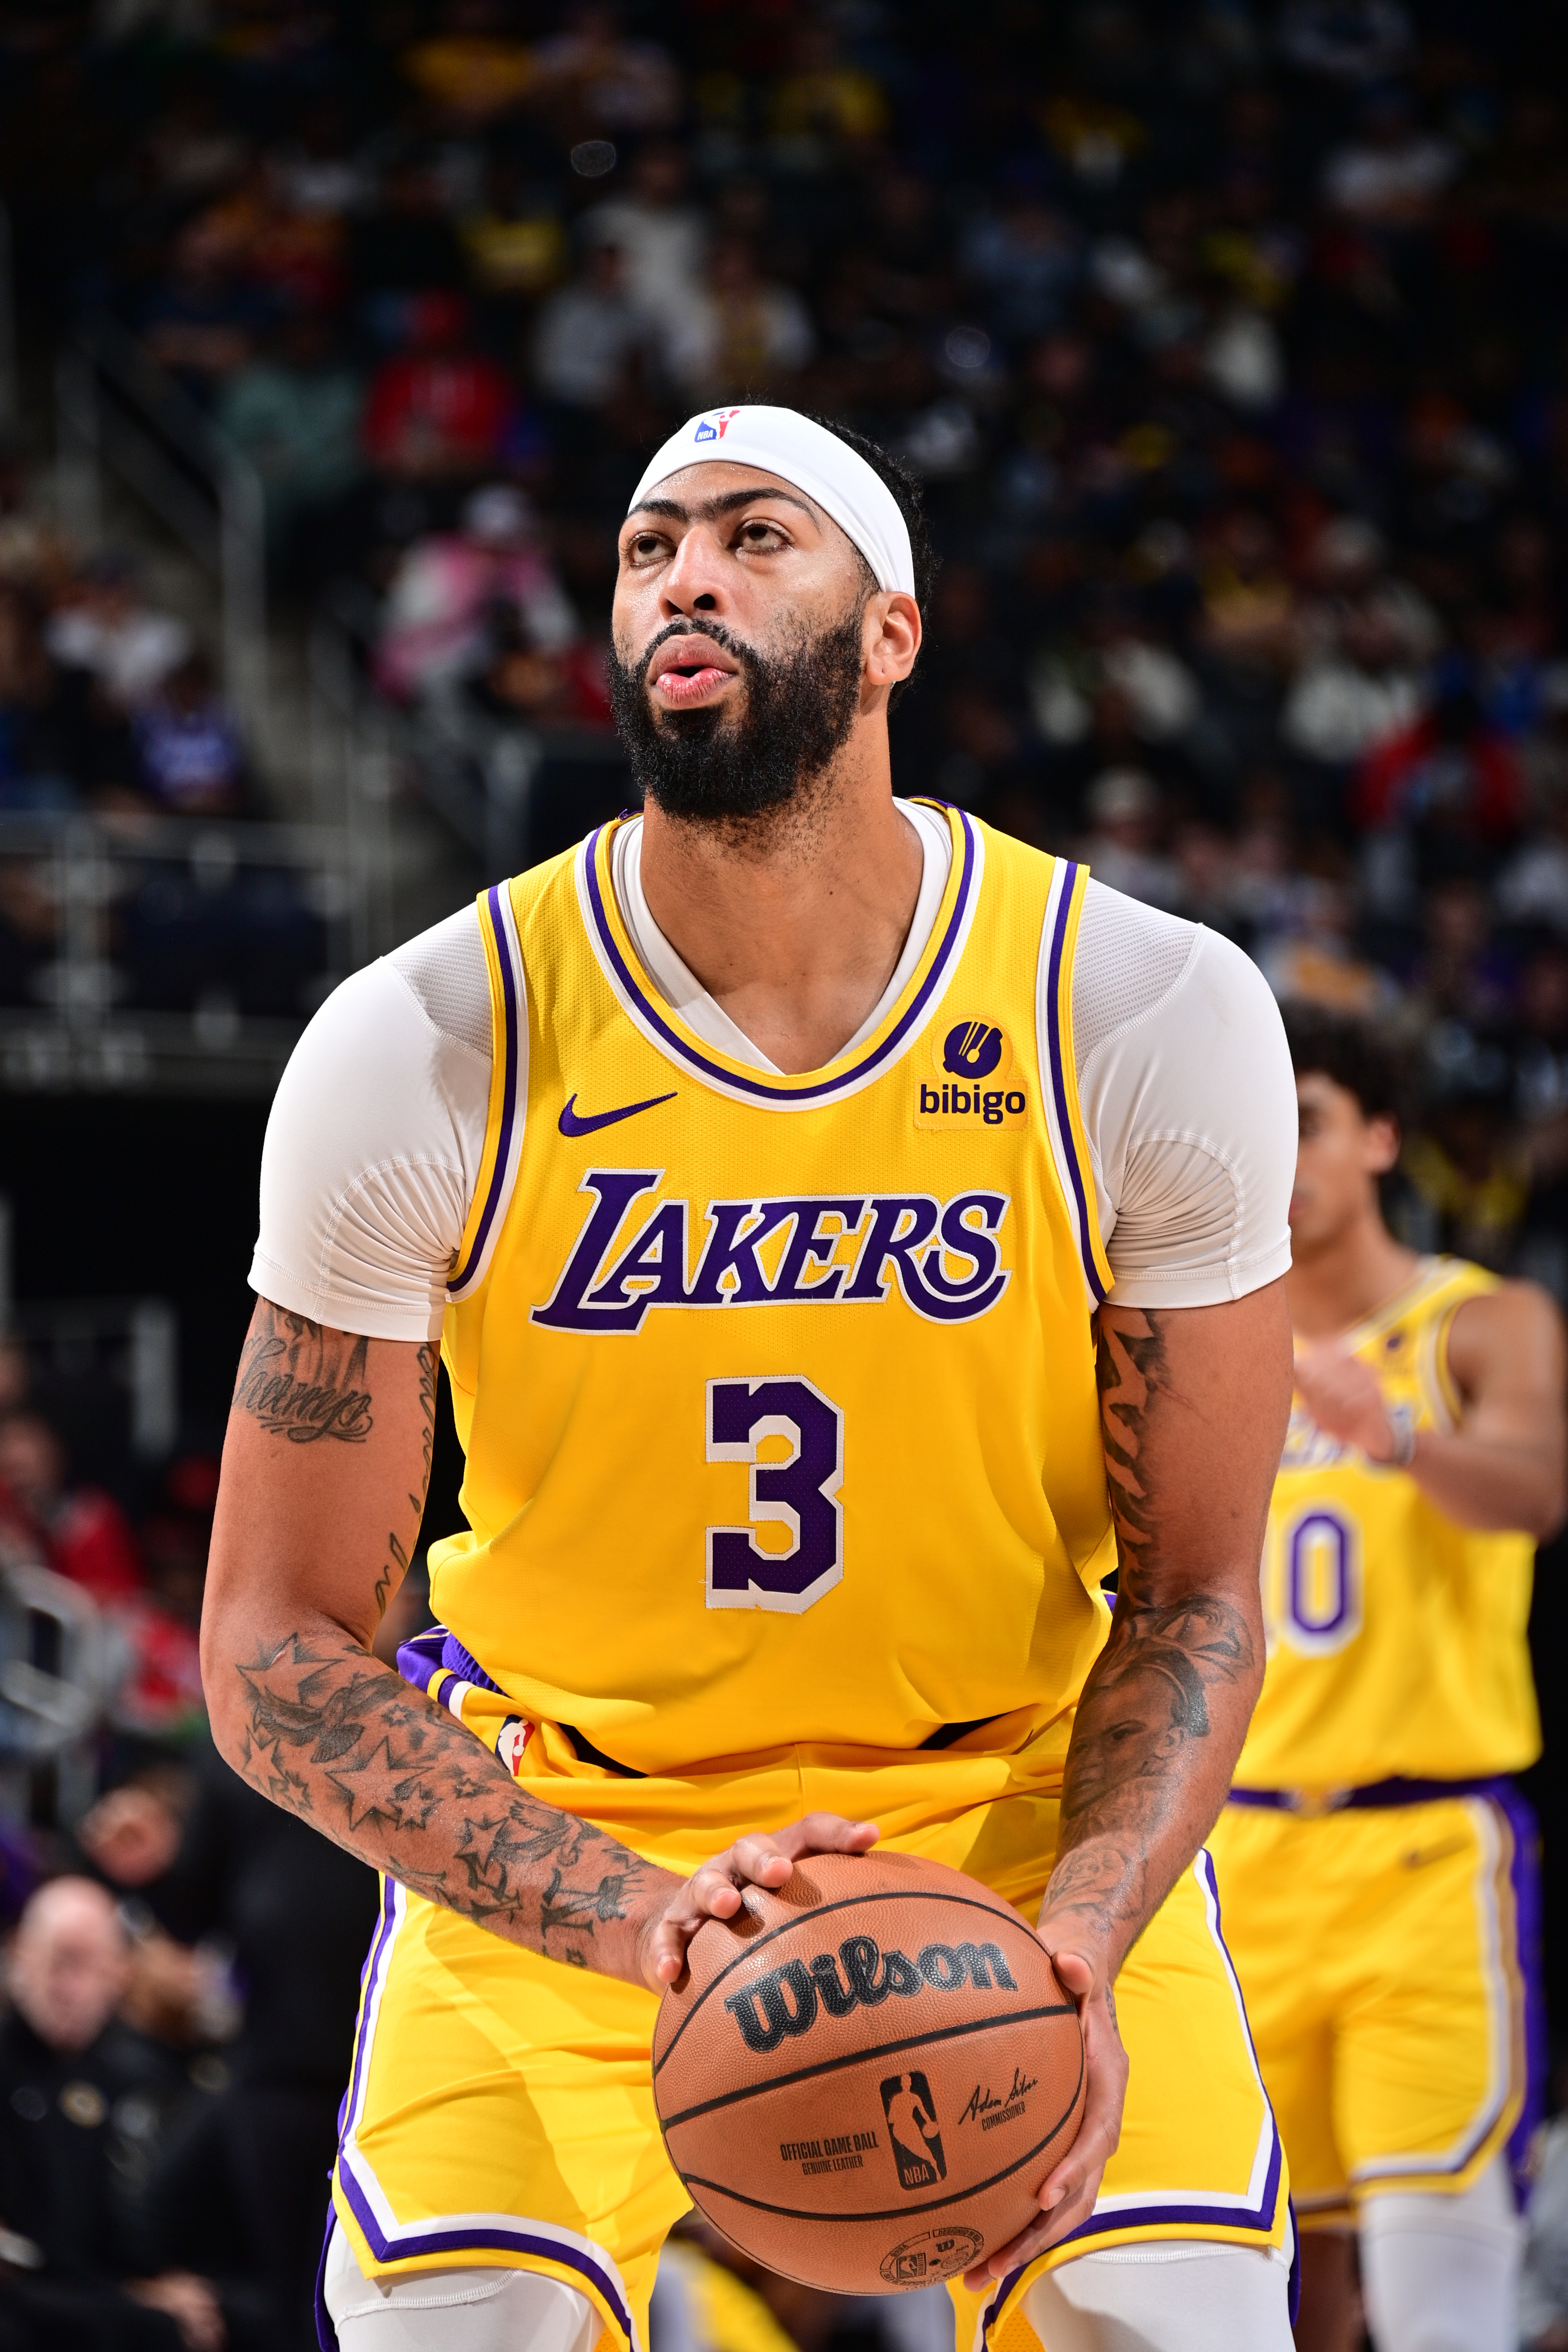 Last season, the Los Angeles Lakers superstar was listed at six-foot-10 and 253 pounds